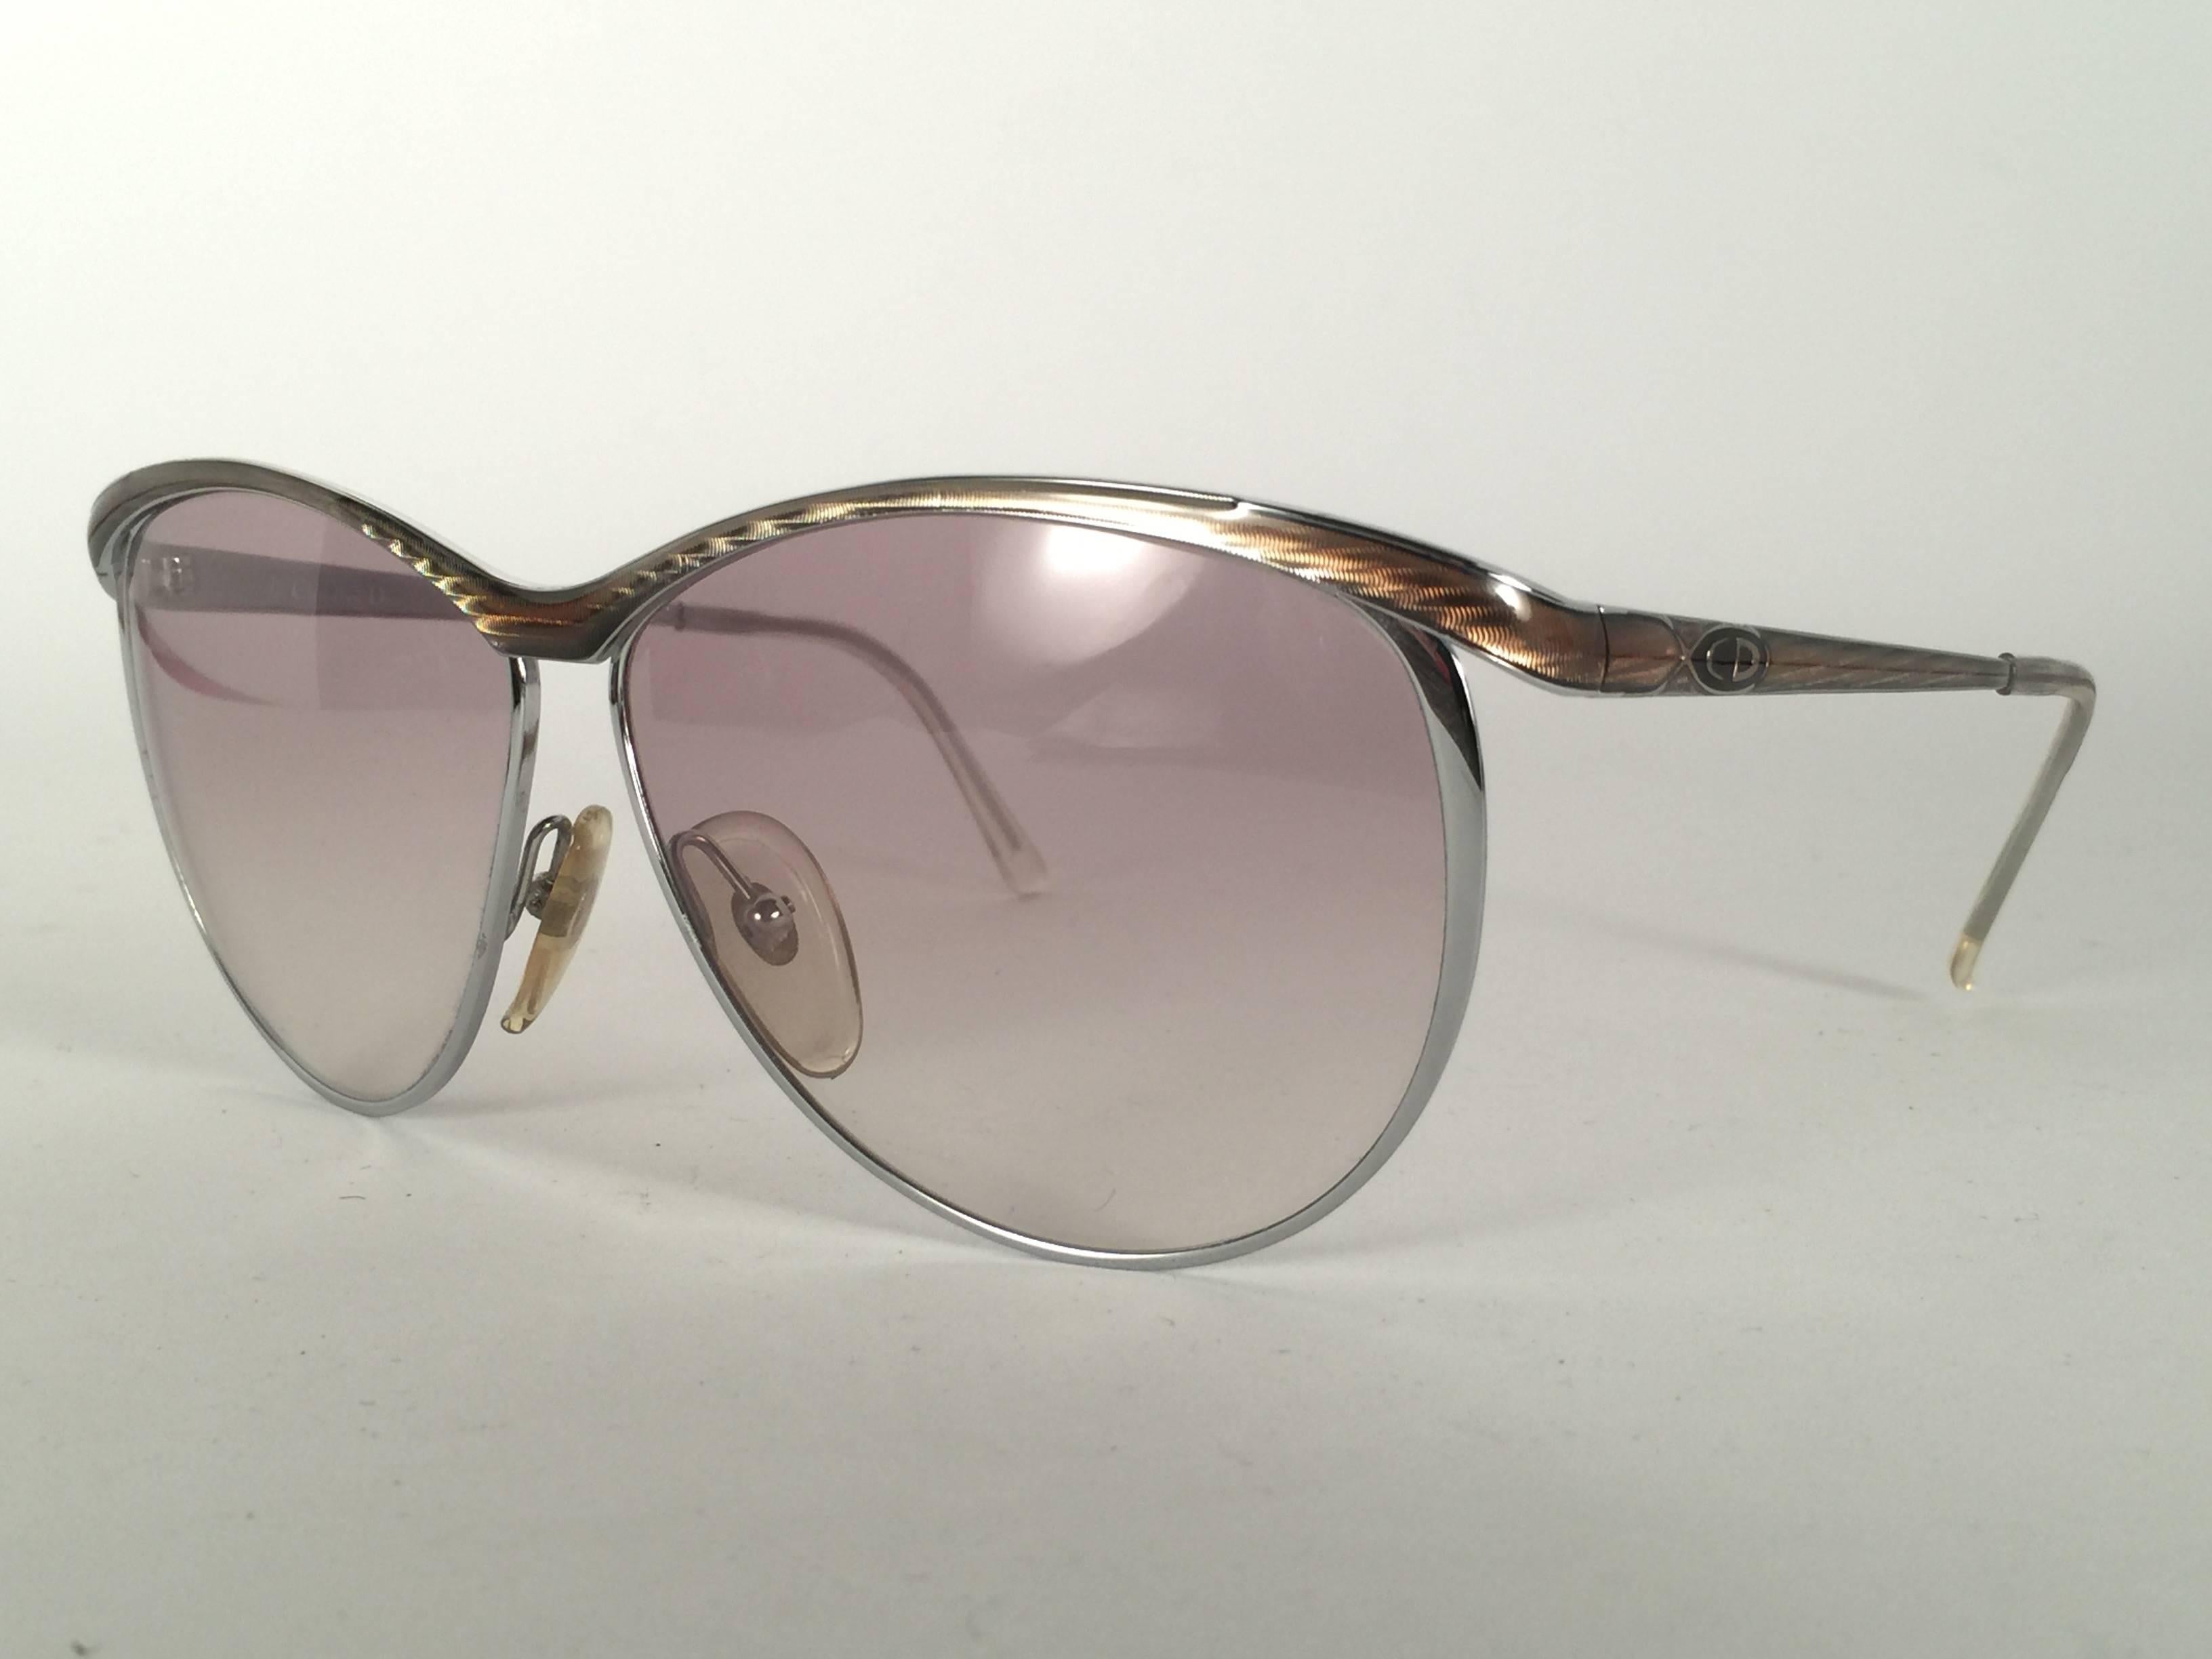 Mint Vintage Christian Dior 2150 Oversized Silver Optyl Sunglasses Germany In New Condition For Sale In Baleares, Baleares